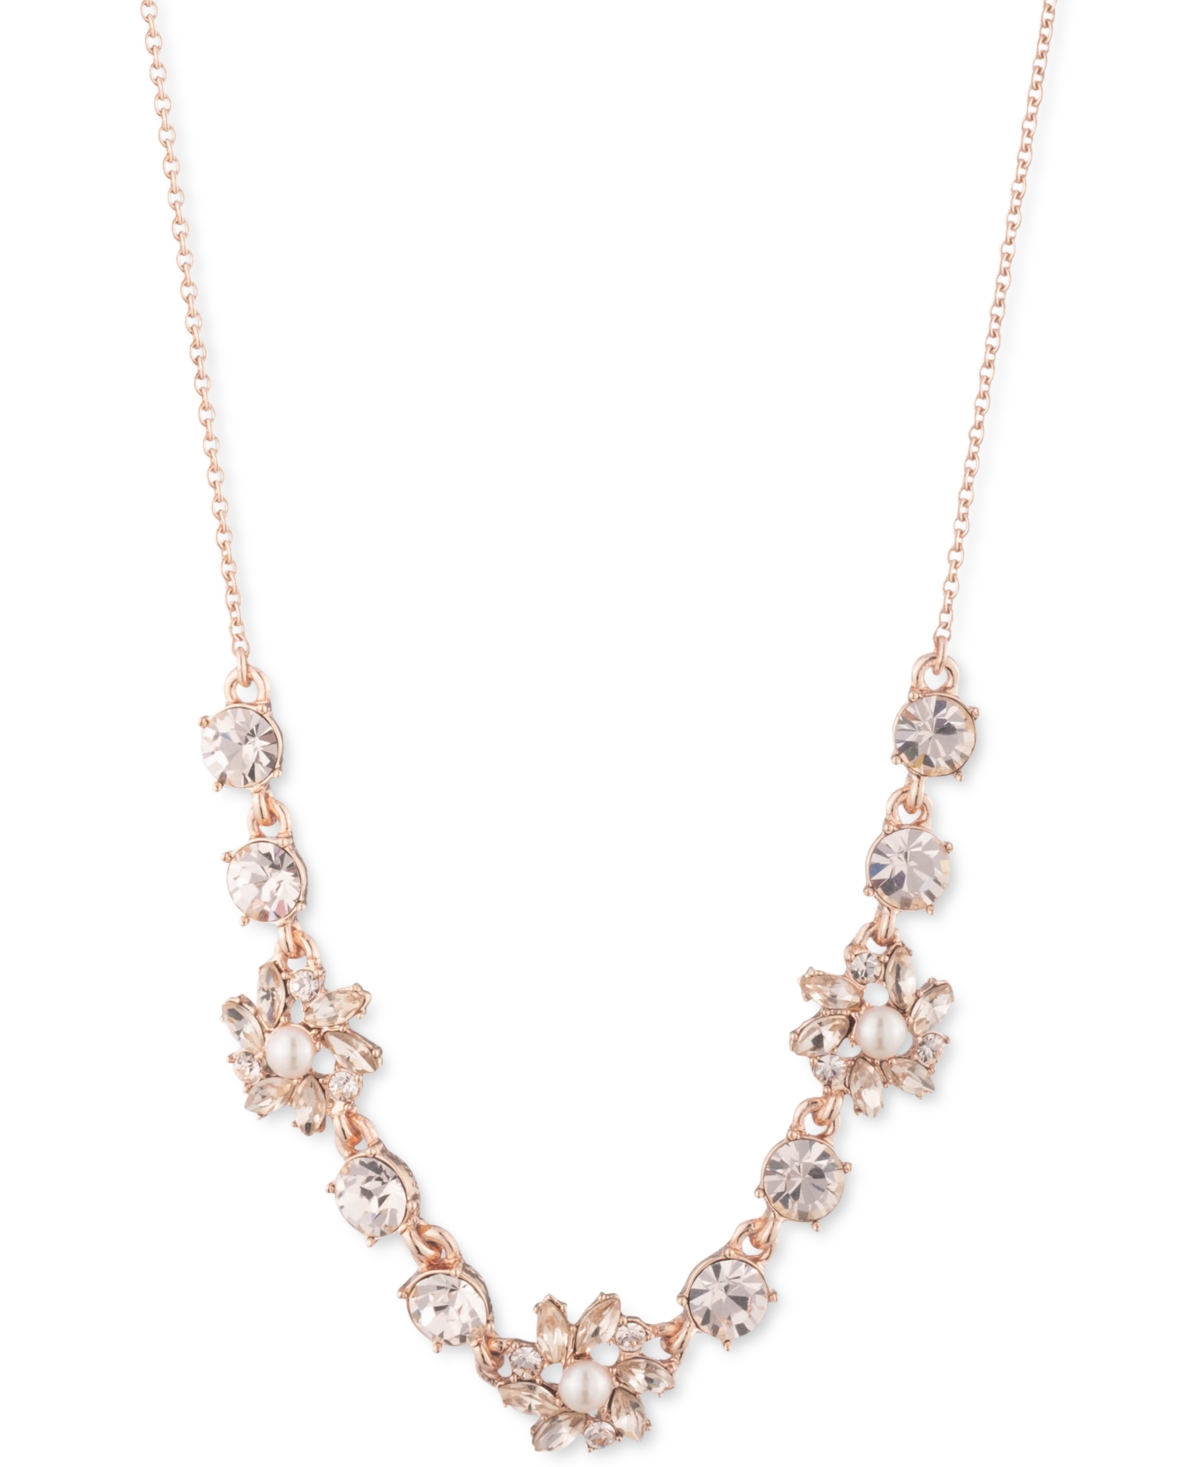 MARCHESA ROSE GOLD-TONE CRYSTAL & IMITATION PEARL CLUSTER FLOWER STATEMENT NECKLACE, 16" + 3" EXTENDER